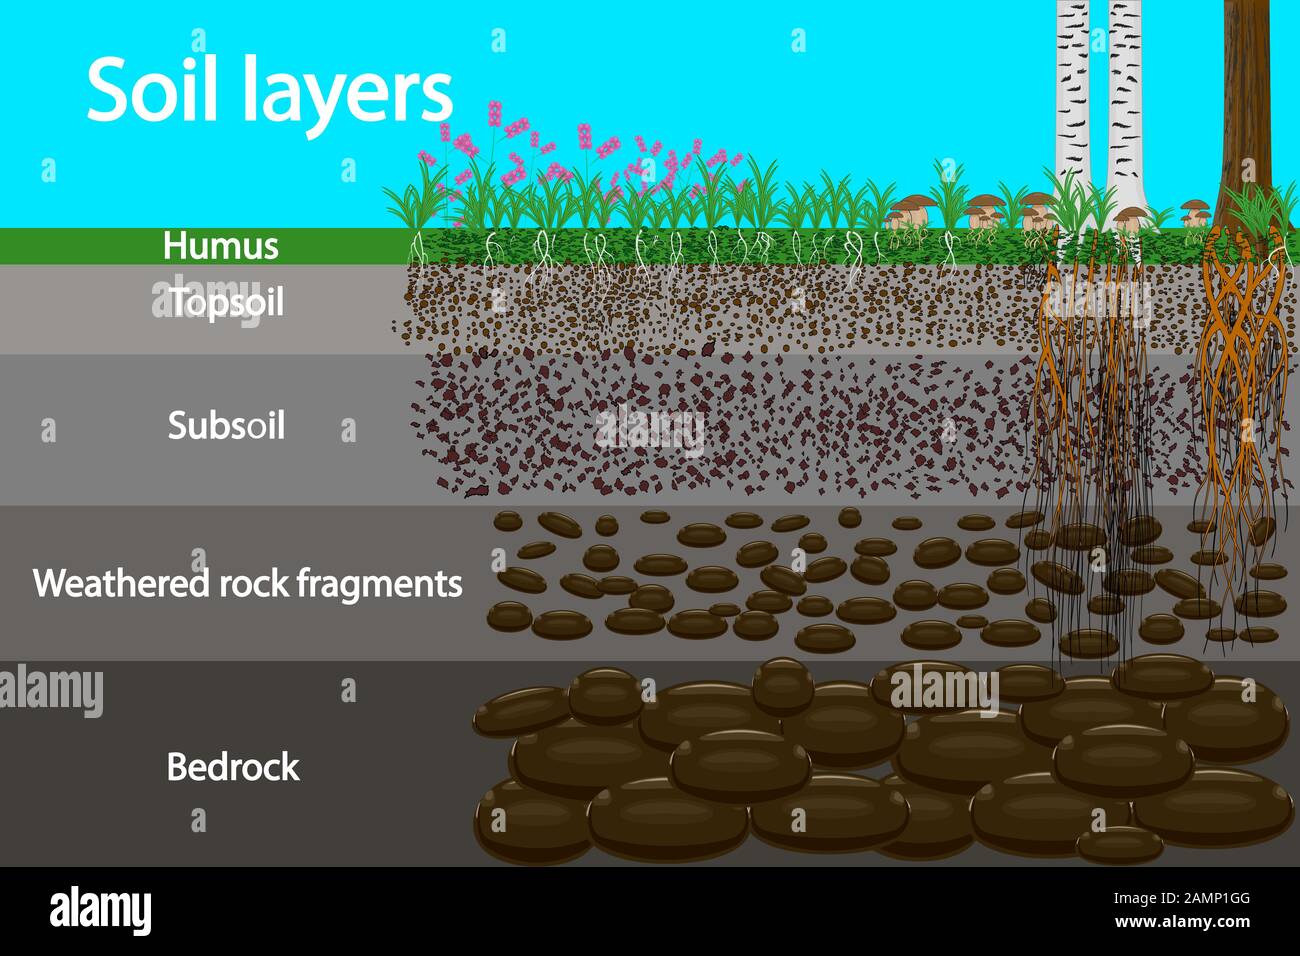 Diagram for layer of soil. Soil layer scheme with plant, earth texture and stones. Cross section of humus and underground soil layers beneath. Vector Stock Vector